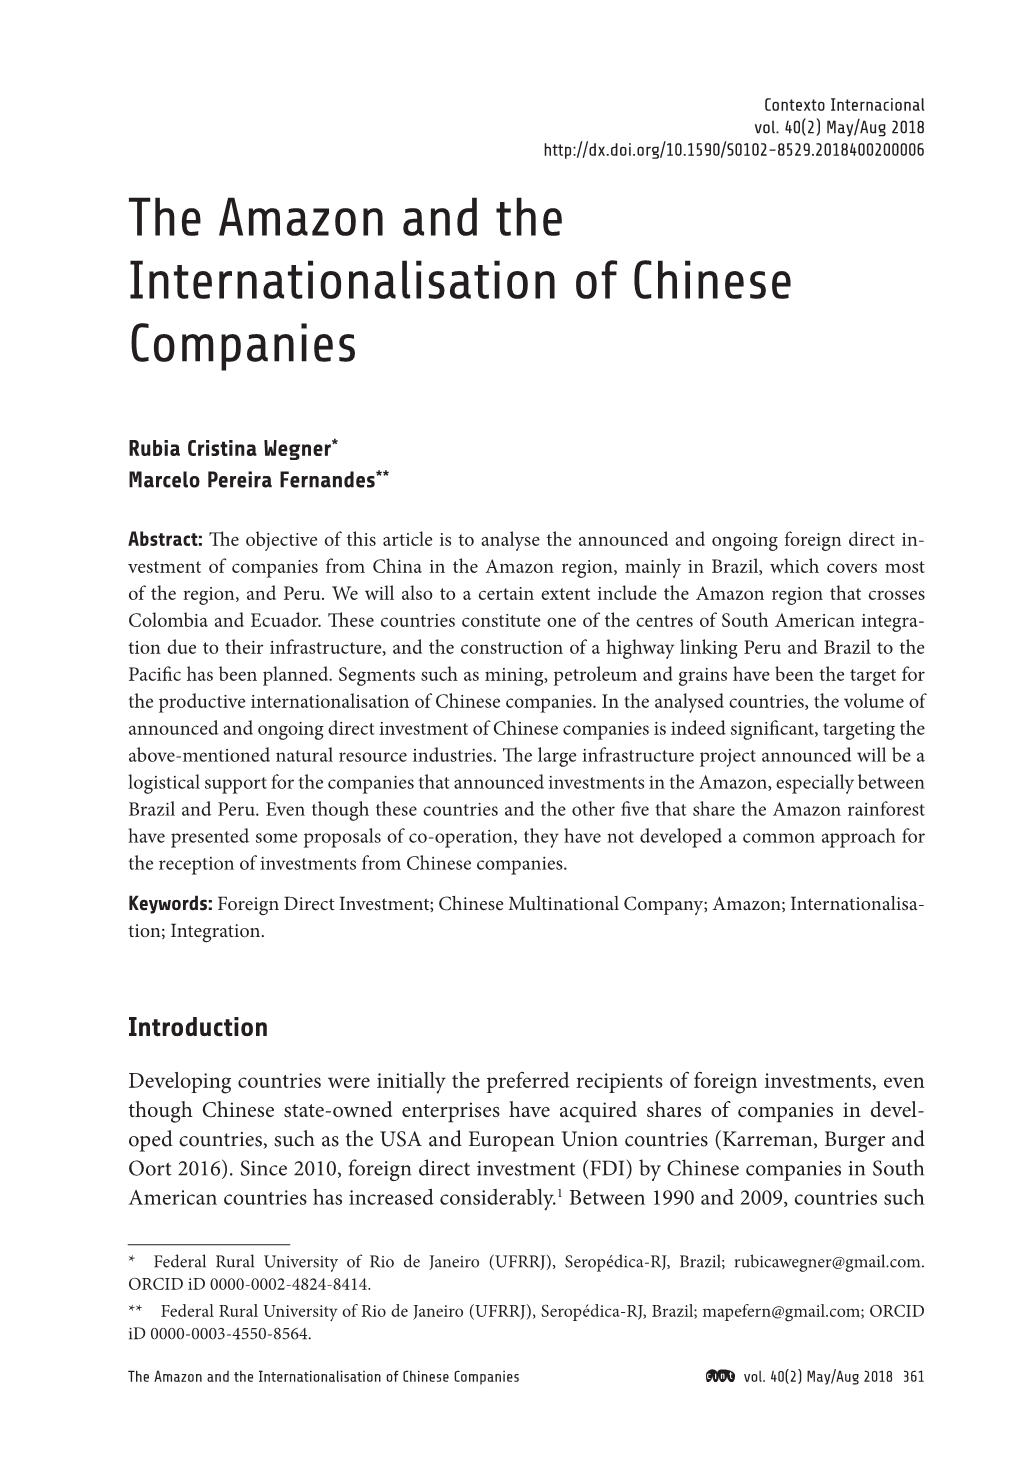 The Amazon and the Internationalisation of Chinese Companies Vol